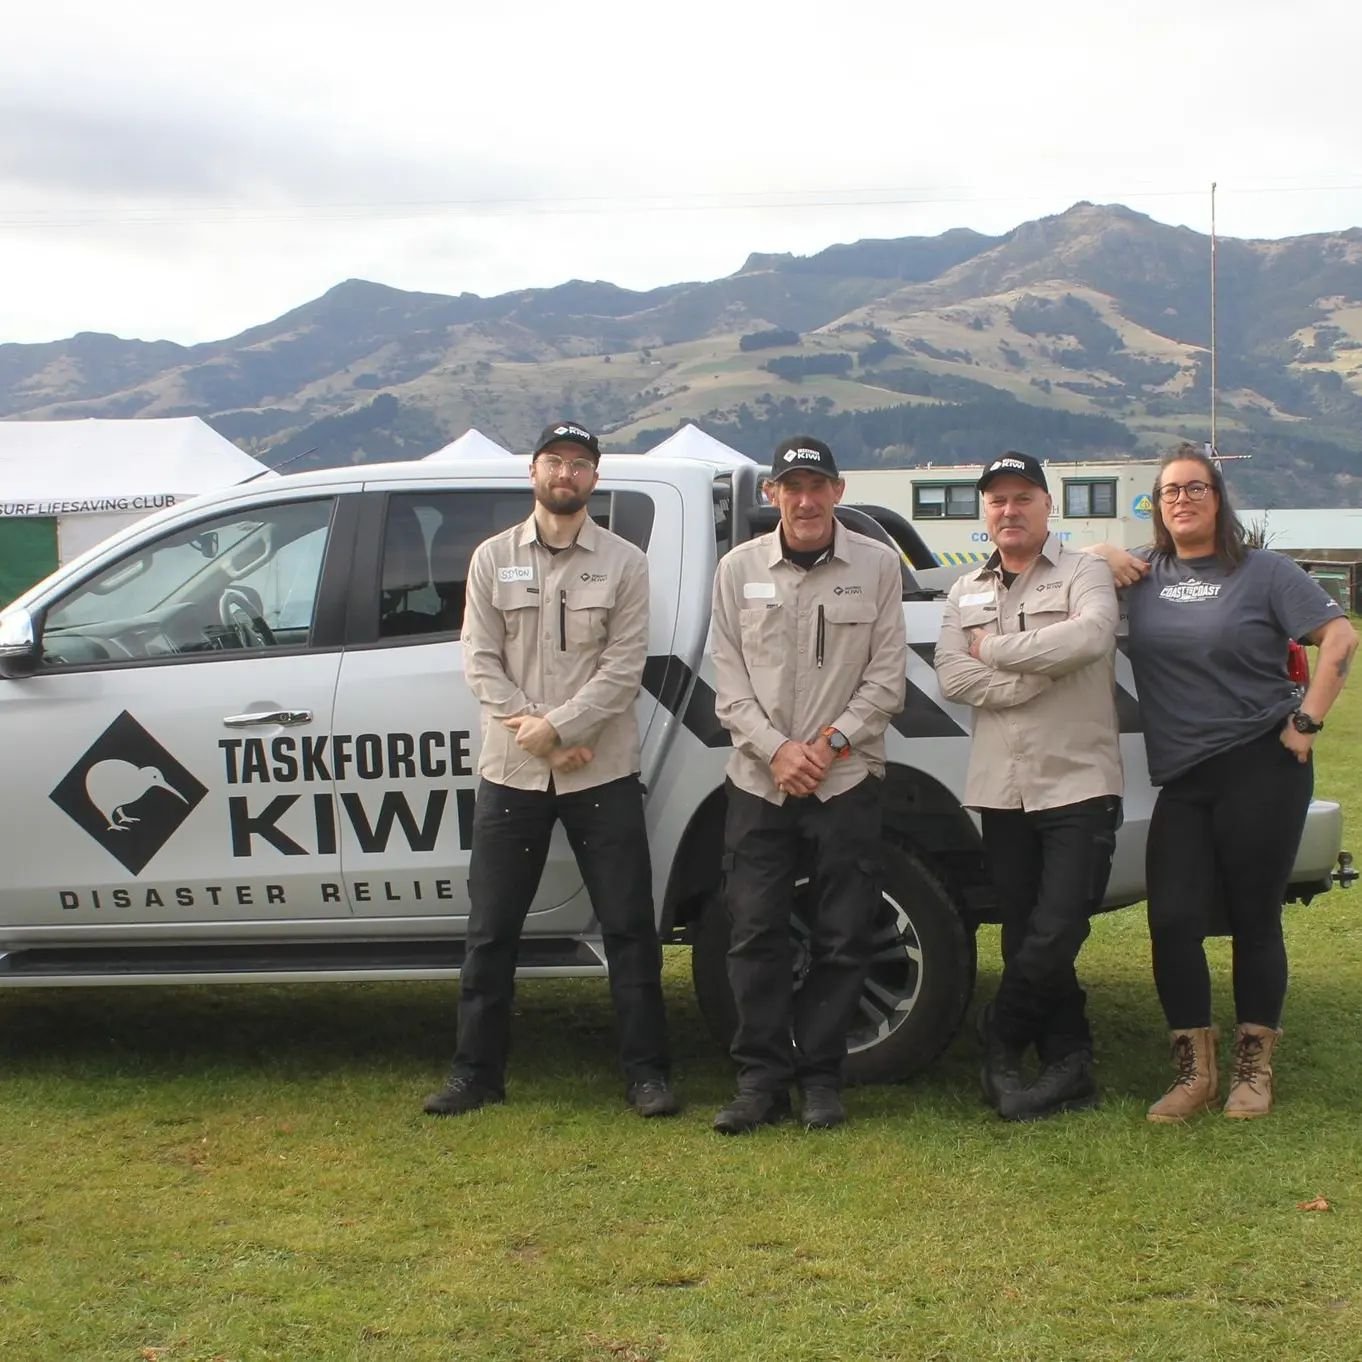 Three Taskforce Kiwi volunteers recently had the opportunity to attend a Surf Lifesaving NZ SAREX (Search and Rescue Exercise) on Banks Peninsula, Canterbury.

The TFK team joined volunteers from Surf Lifesaving NZ, Fire and Emergency NZ, Coastguard 